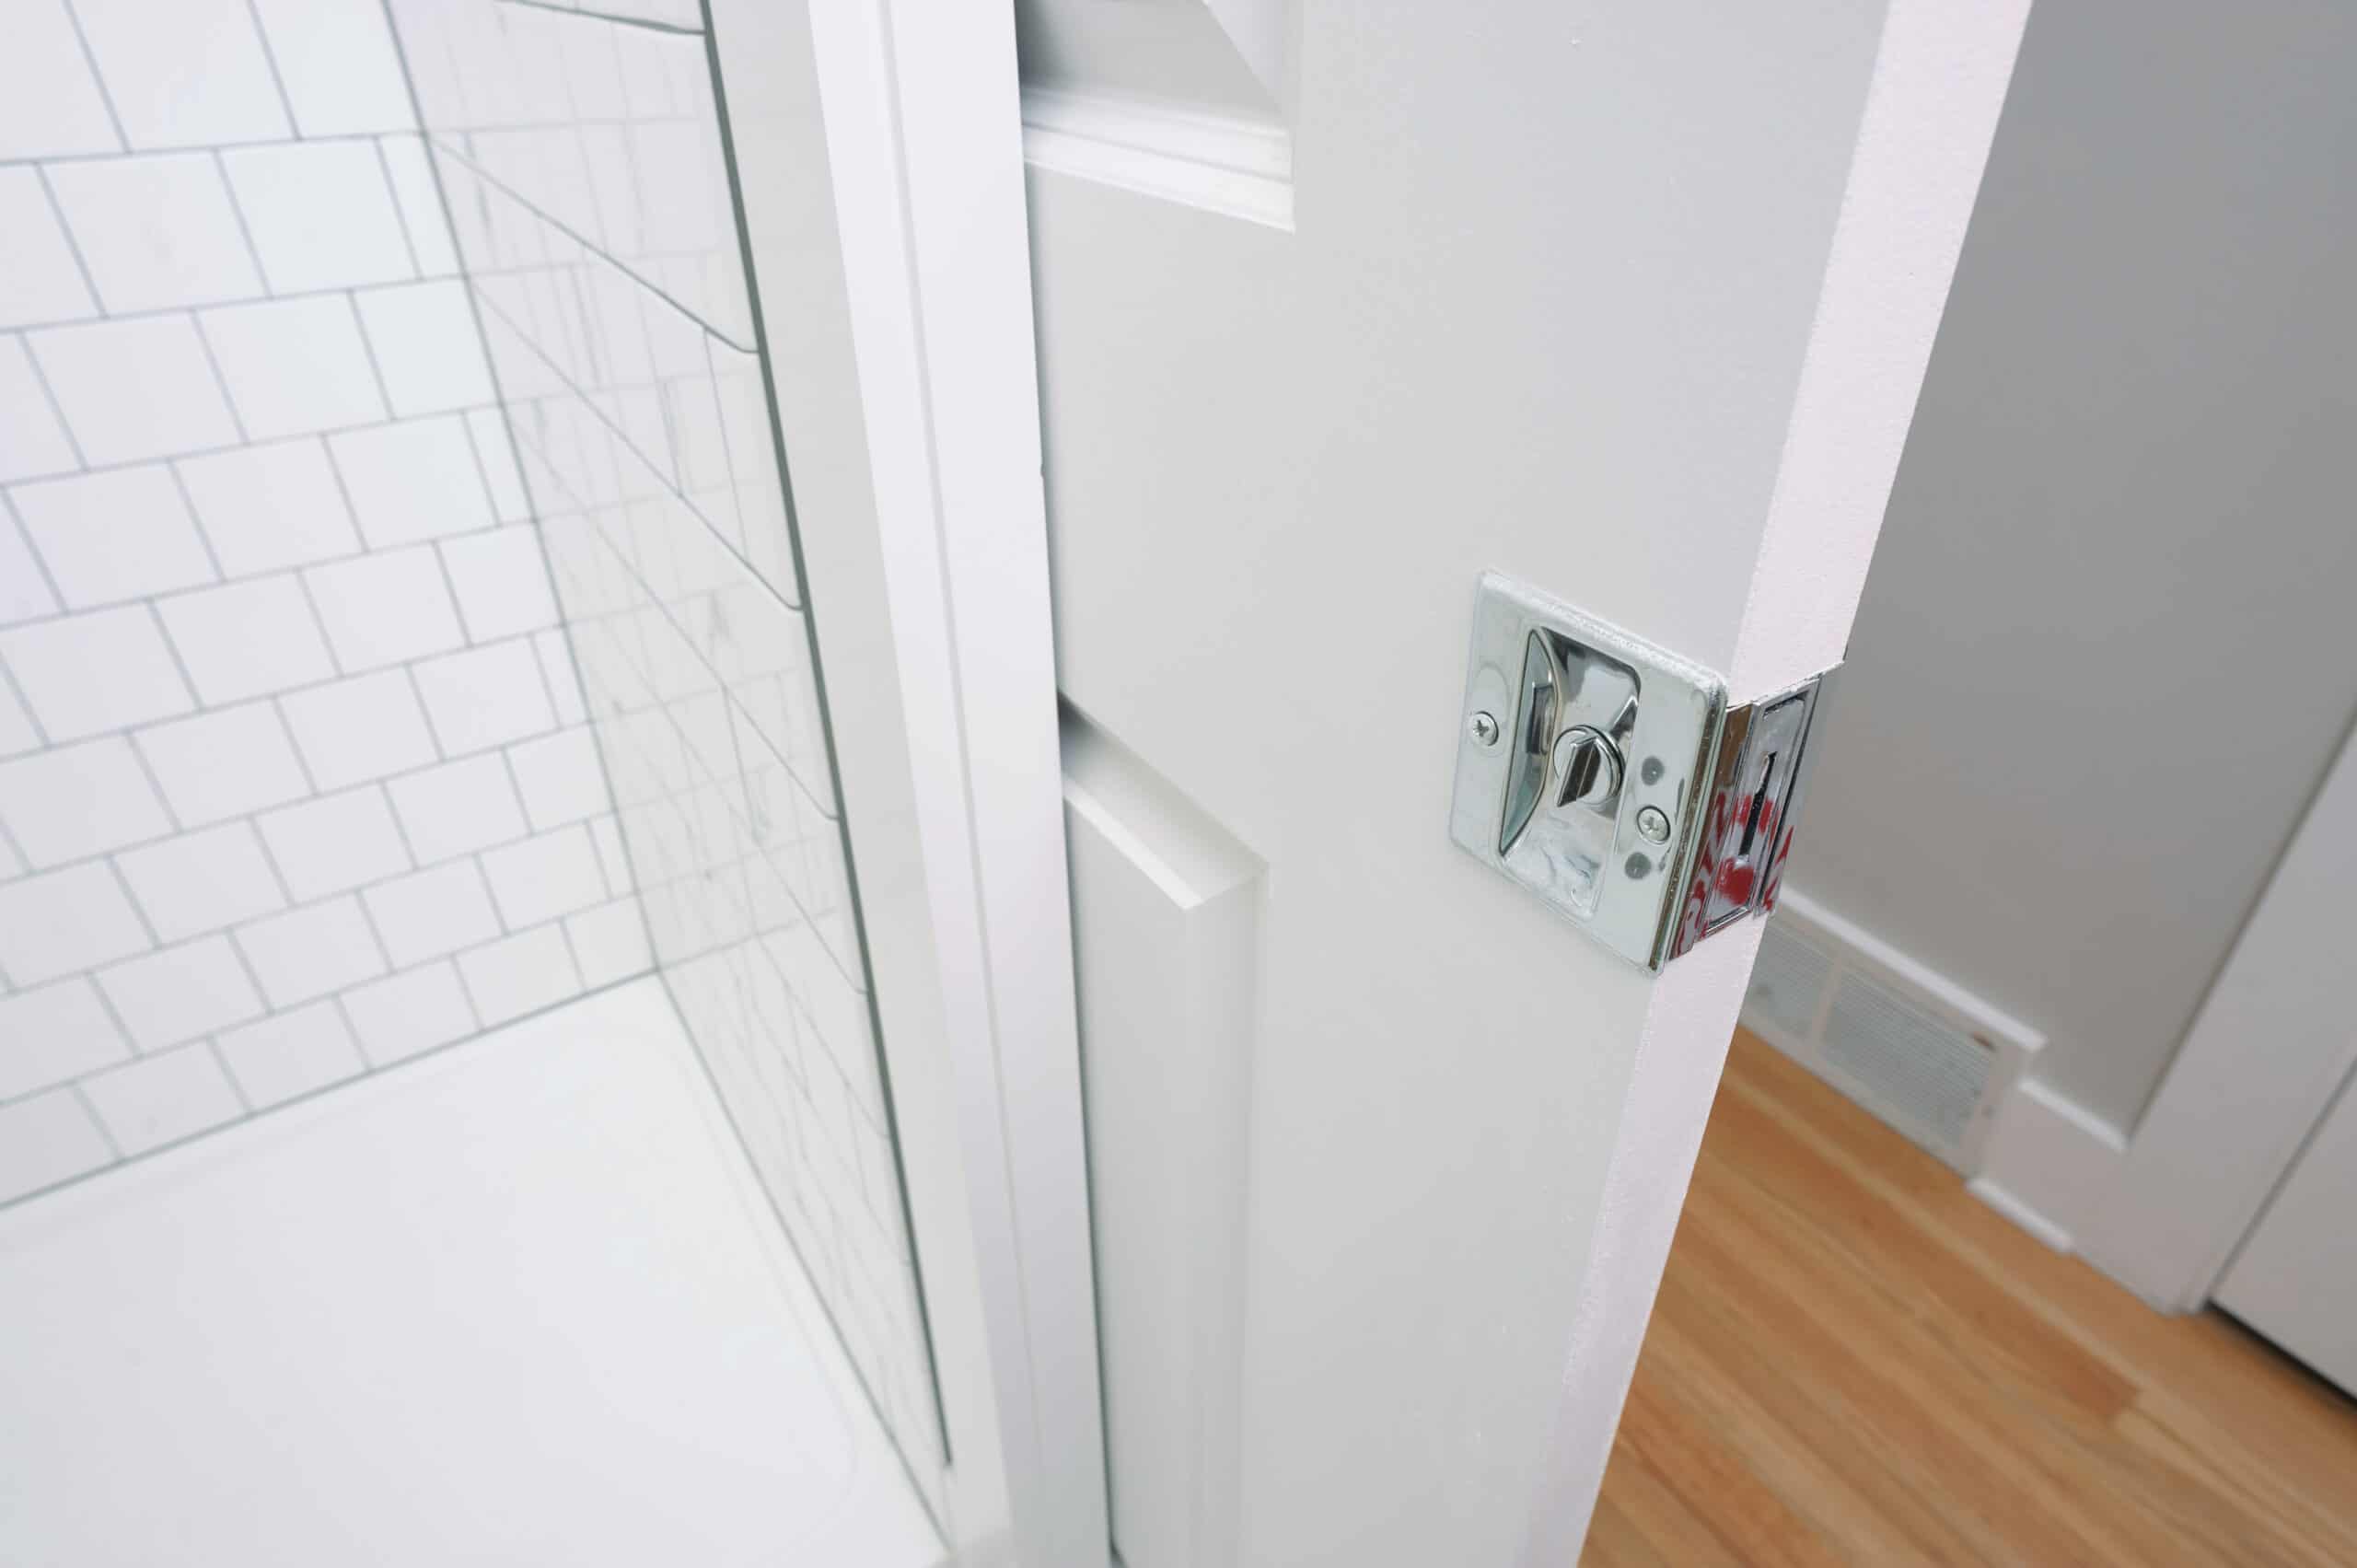 A pocket door saves space in a small bathroom.